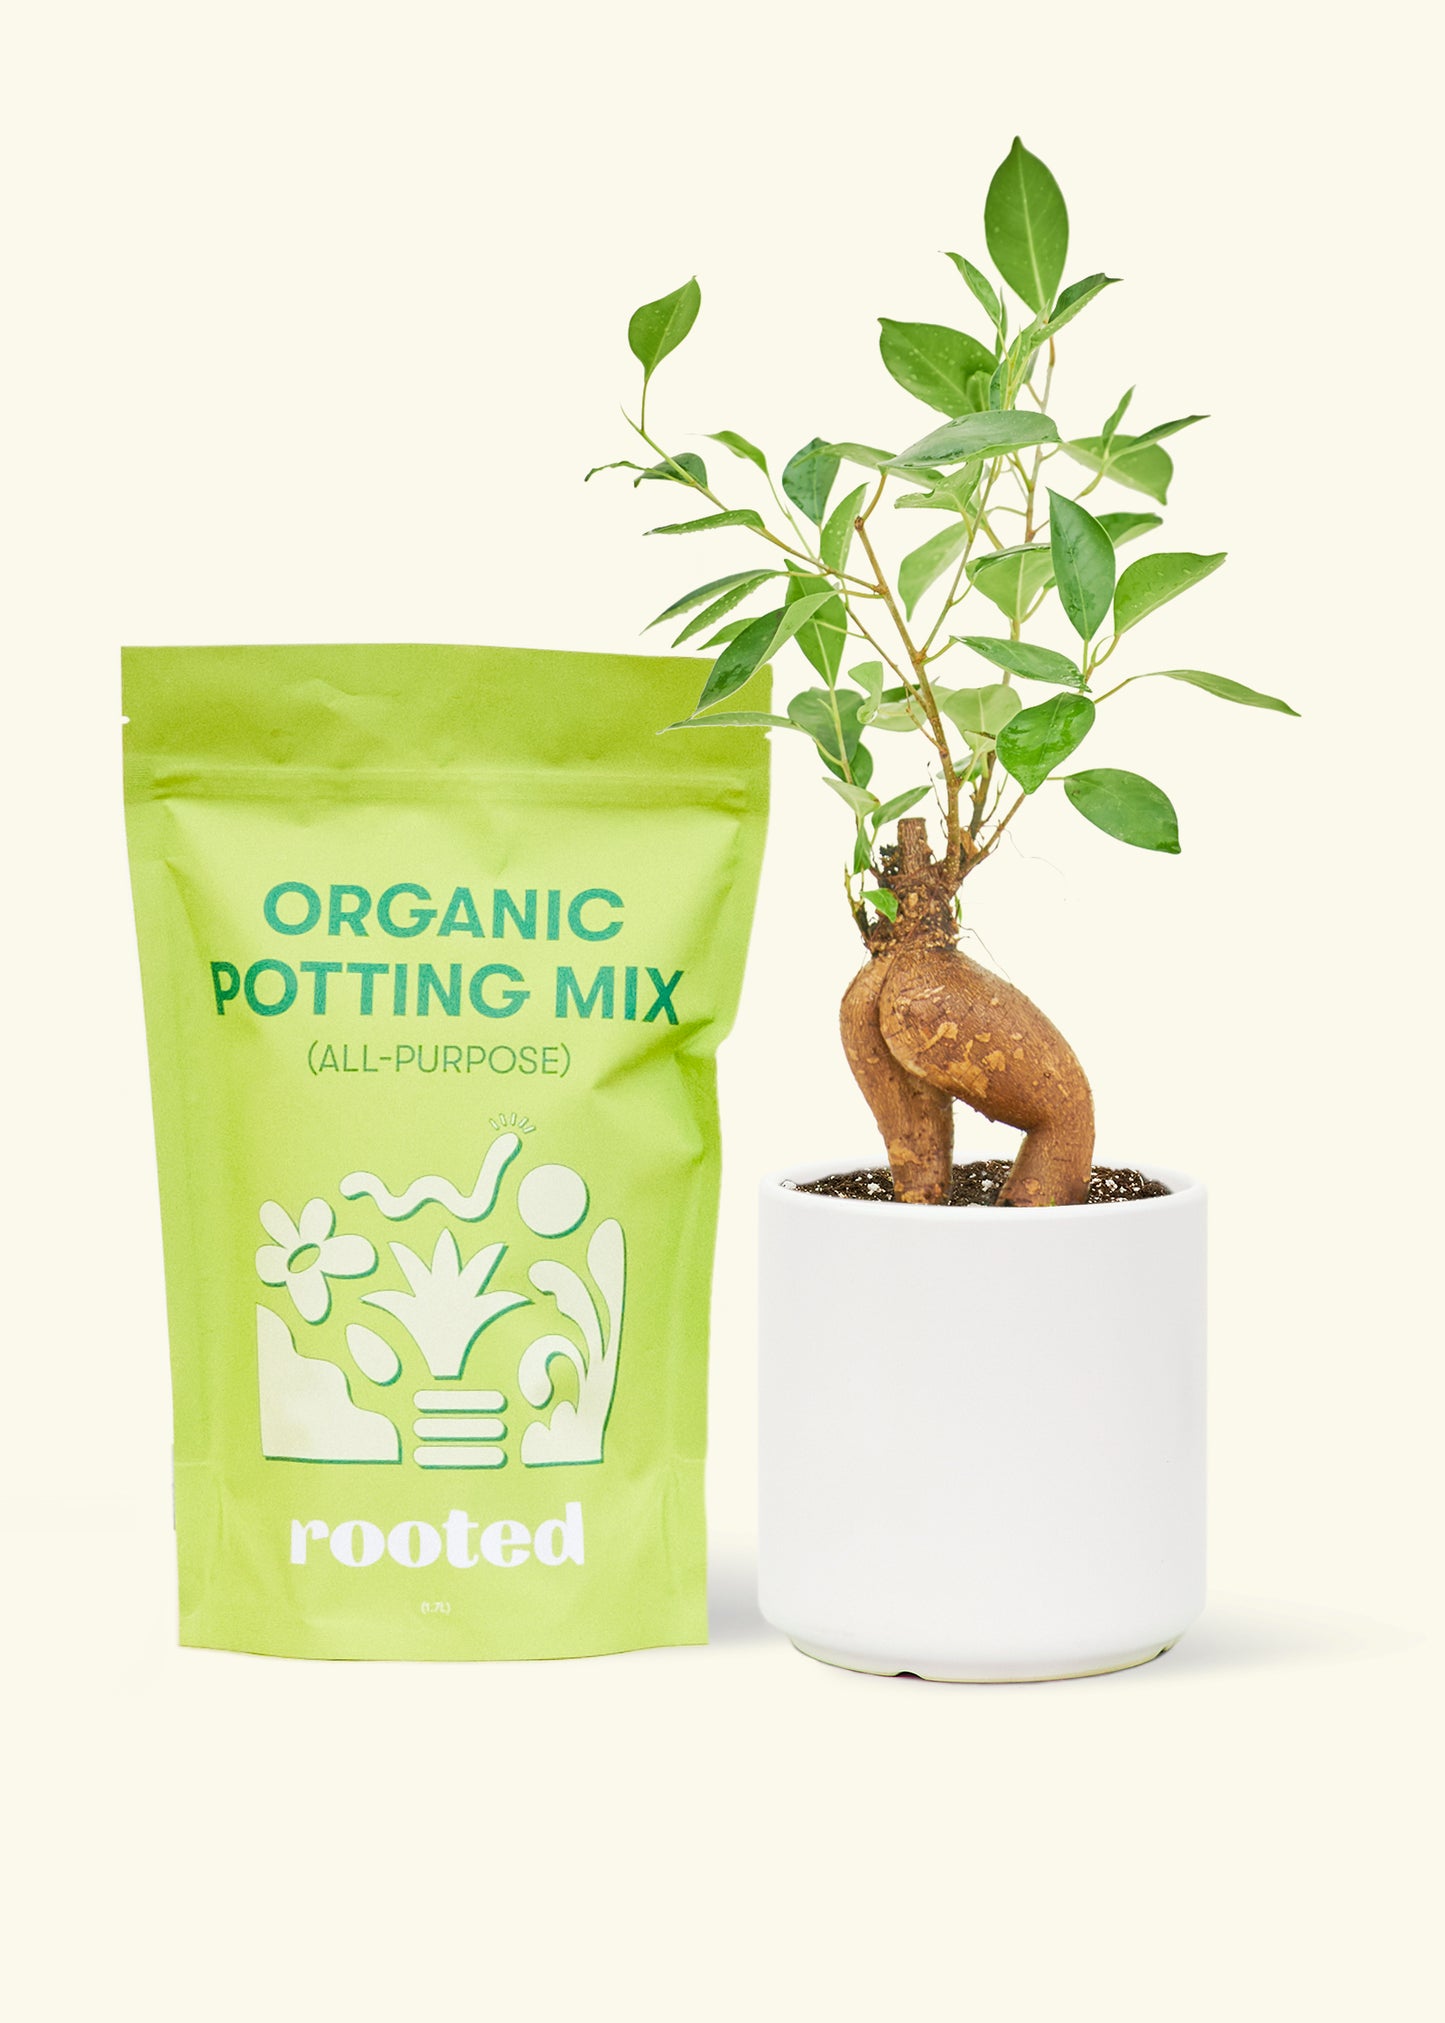 A bag of Organic Potting Mix to the left of a Ficus 'Ginseng' in a white cylinder ceramic pot.